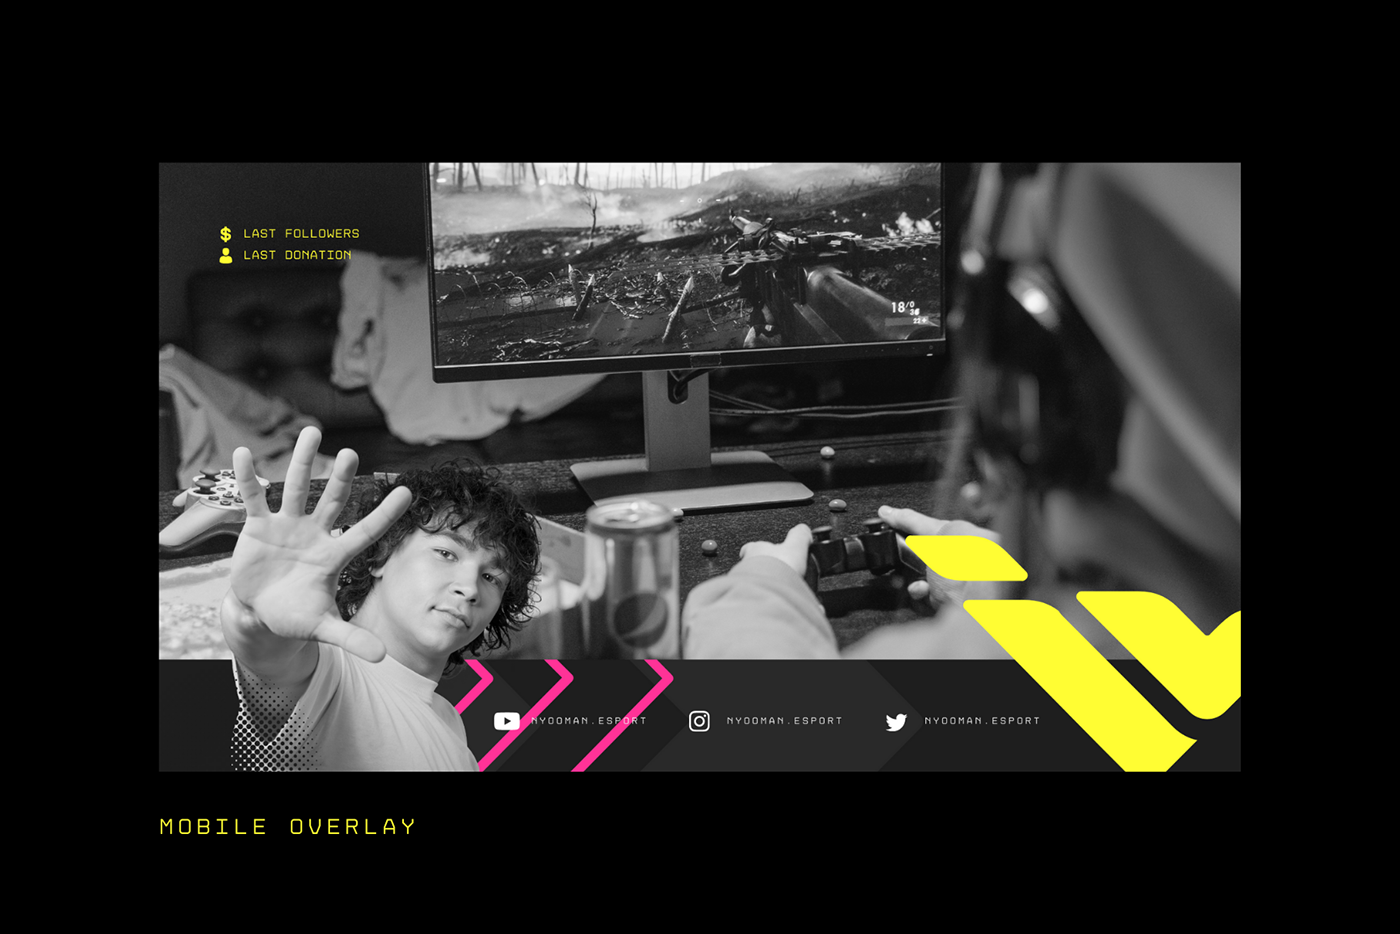 stream overlay Streaming game esports Gaming Twitch youtube Content Creator live live streaming